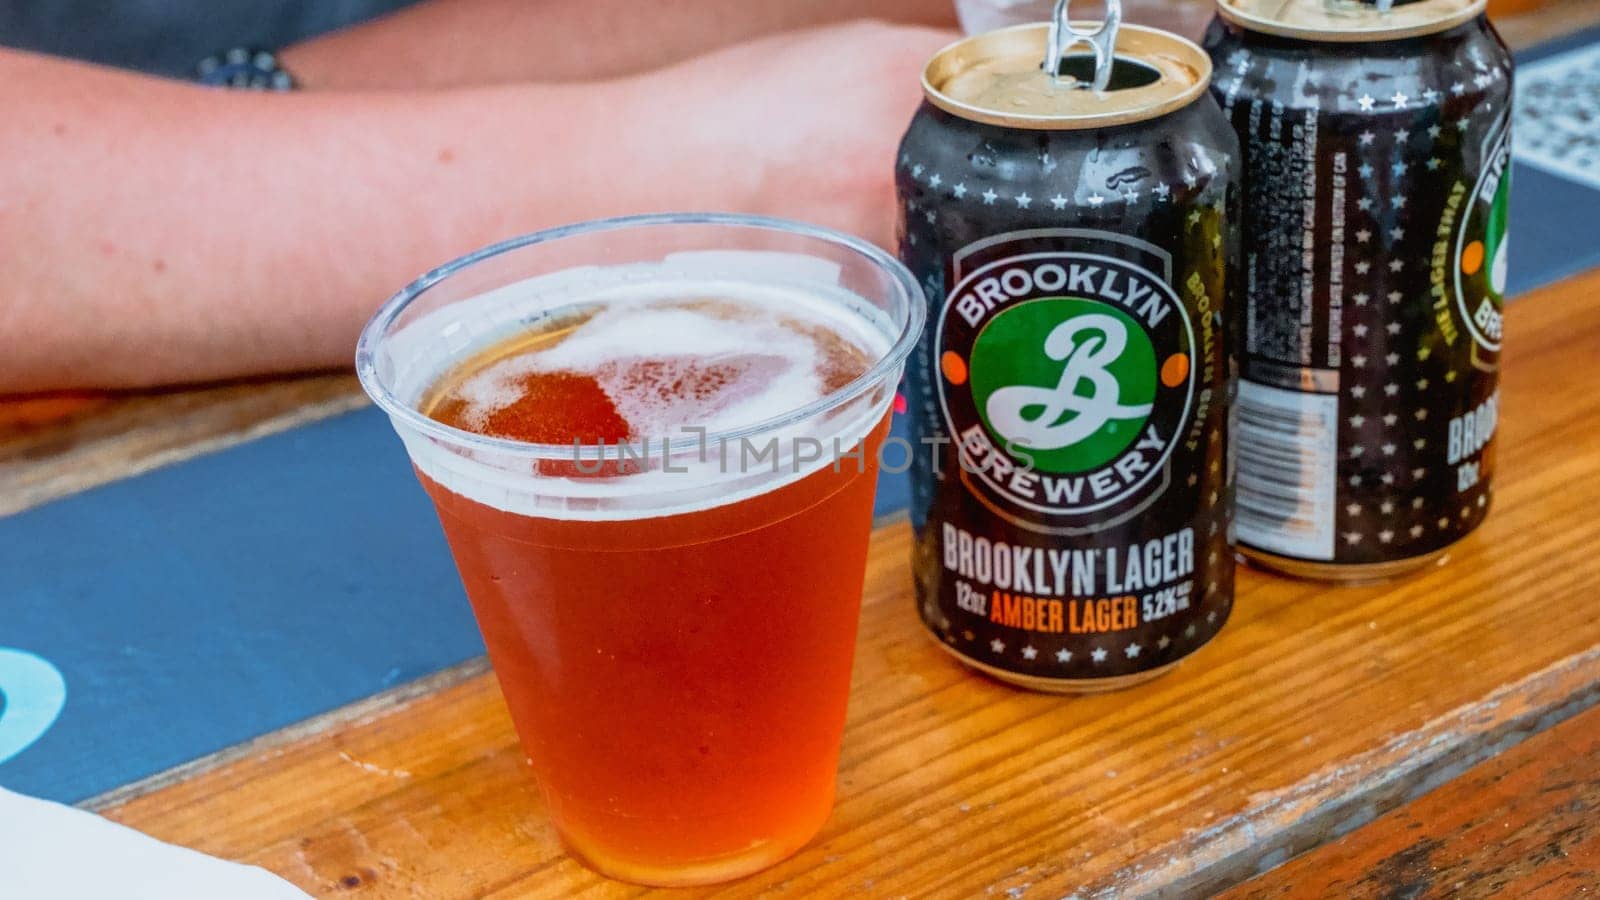 A half-full plastic cup of amber lager sits on a wooden table next to two unopened cans of the same beer. The Brooklyn Brewery logo is visible on the can. Isolated on a wooden background.